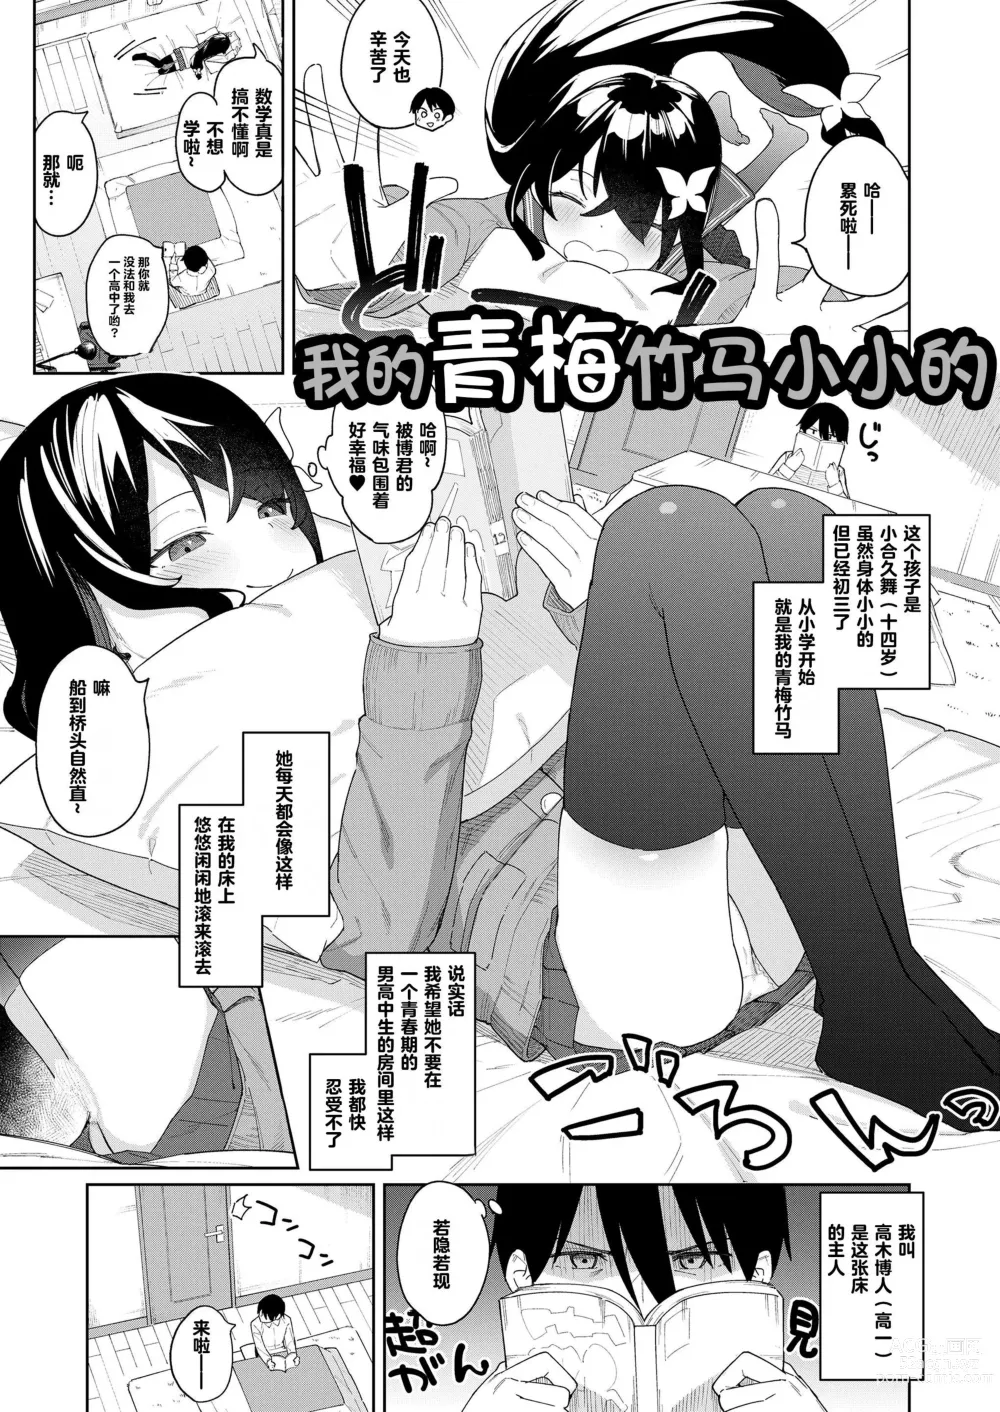 Page 2 of doujinshi My childhood friend is small